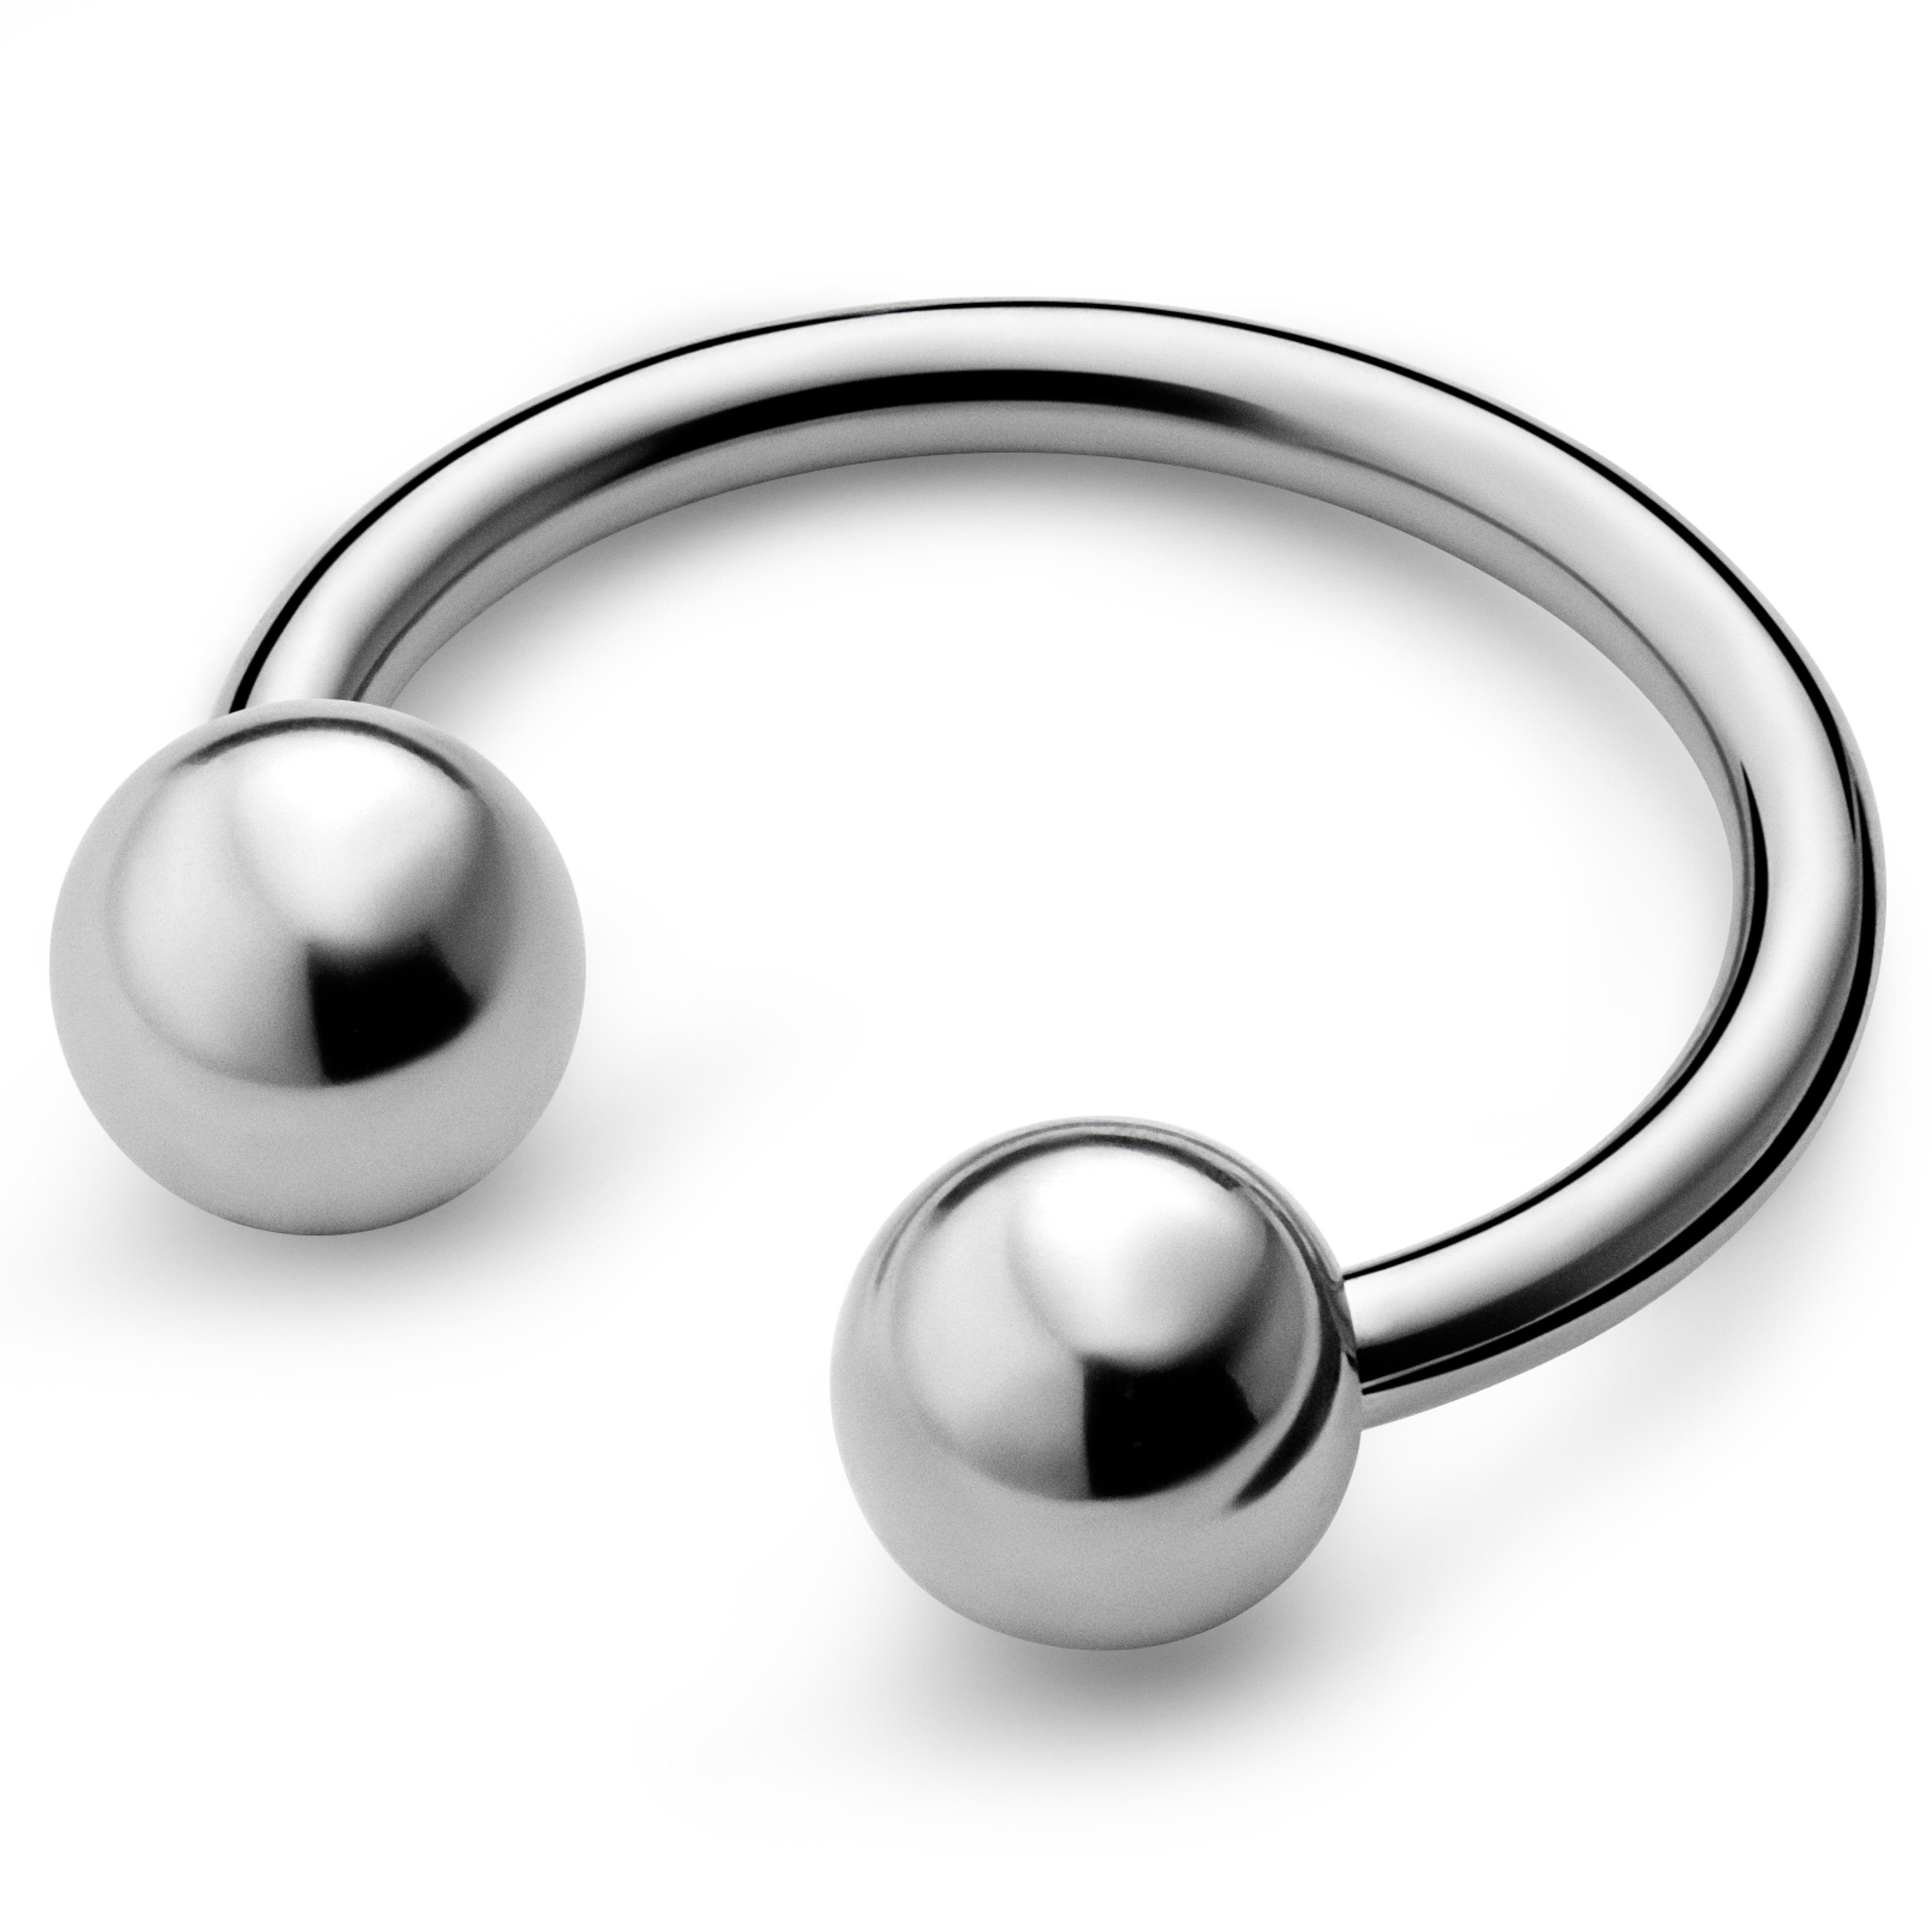 Small 8 mm Silver-Tone Surgical Steel Circular Barbell